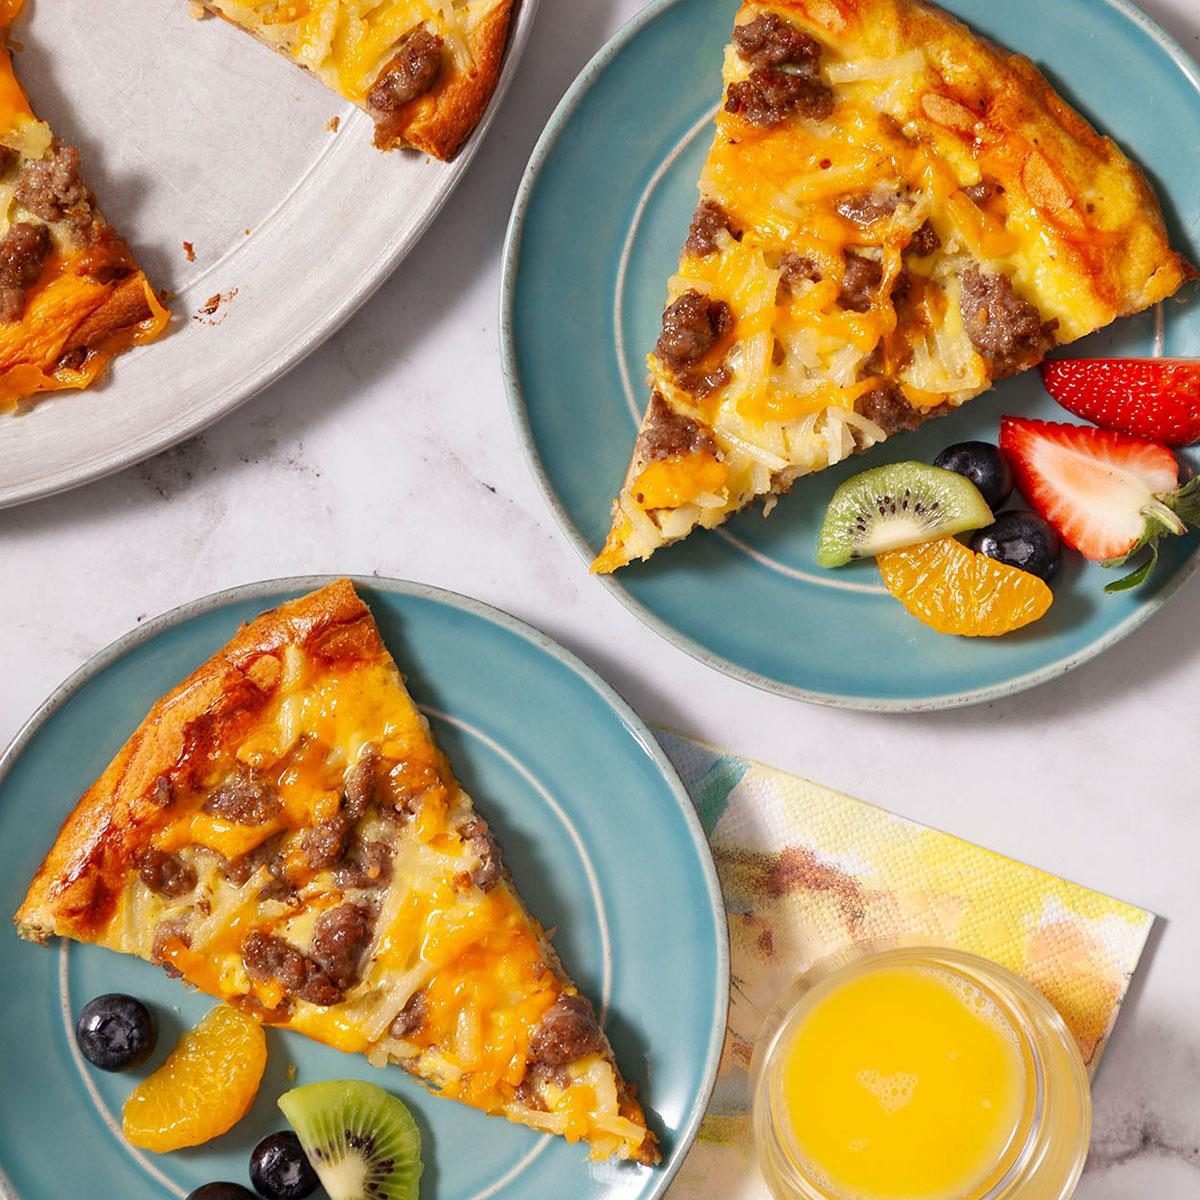 https://www.tasteofhome.com/wp-content/uploads/2018/01/Sausage-and-Hashbrown-Breakfast-Pizza_EXPS_FT23_8551_EC_120123_3.jpg?fit=700%2C1024